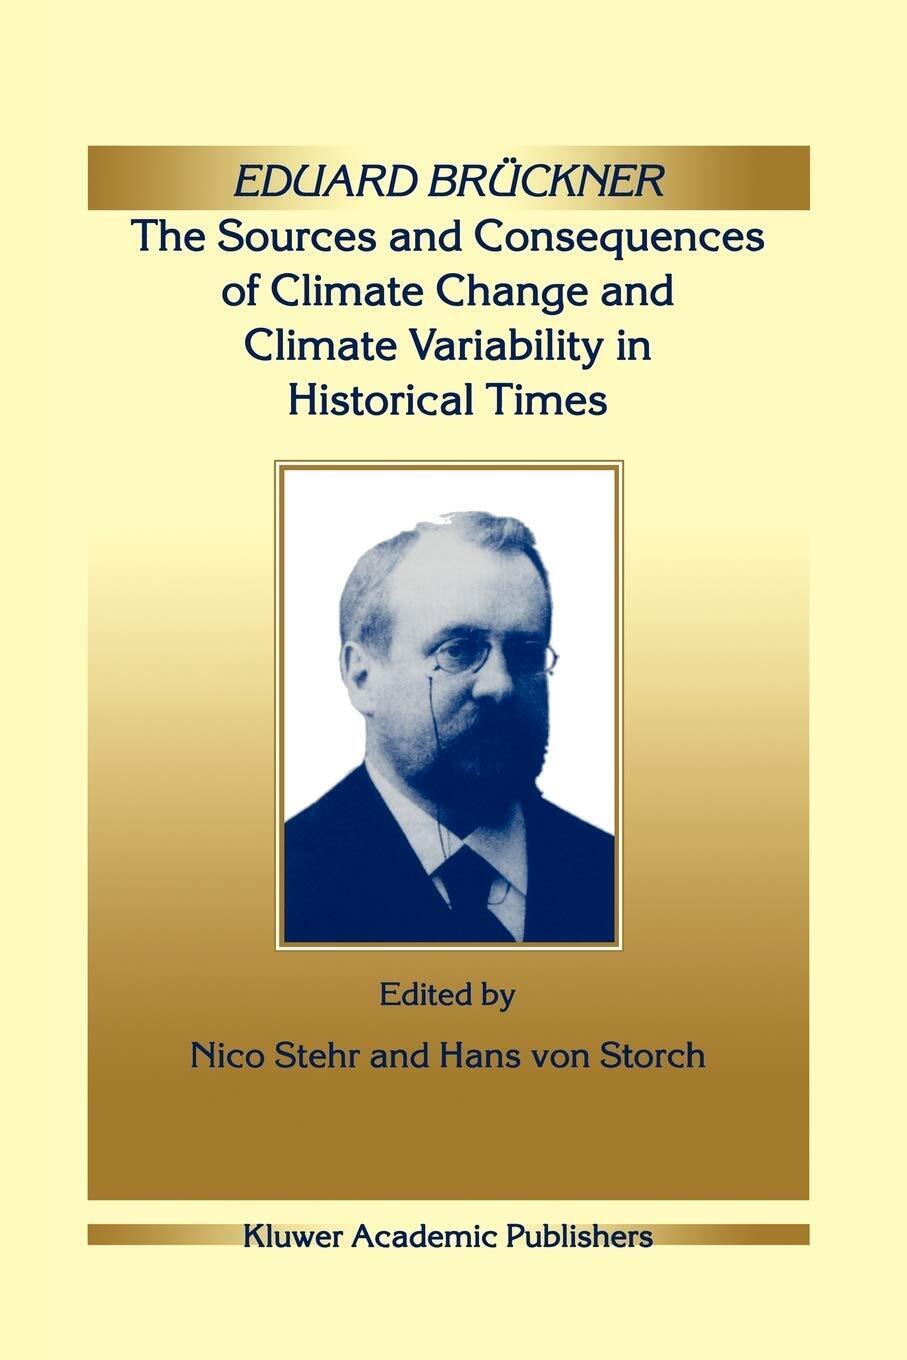 Eduard Br?ckner - the Sources and Consequences of Climate Change and Climate